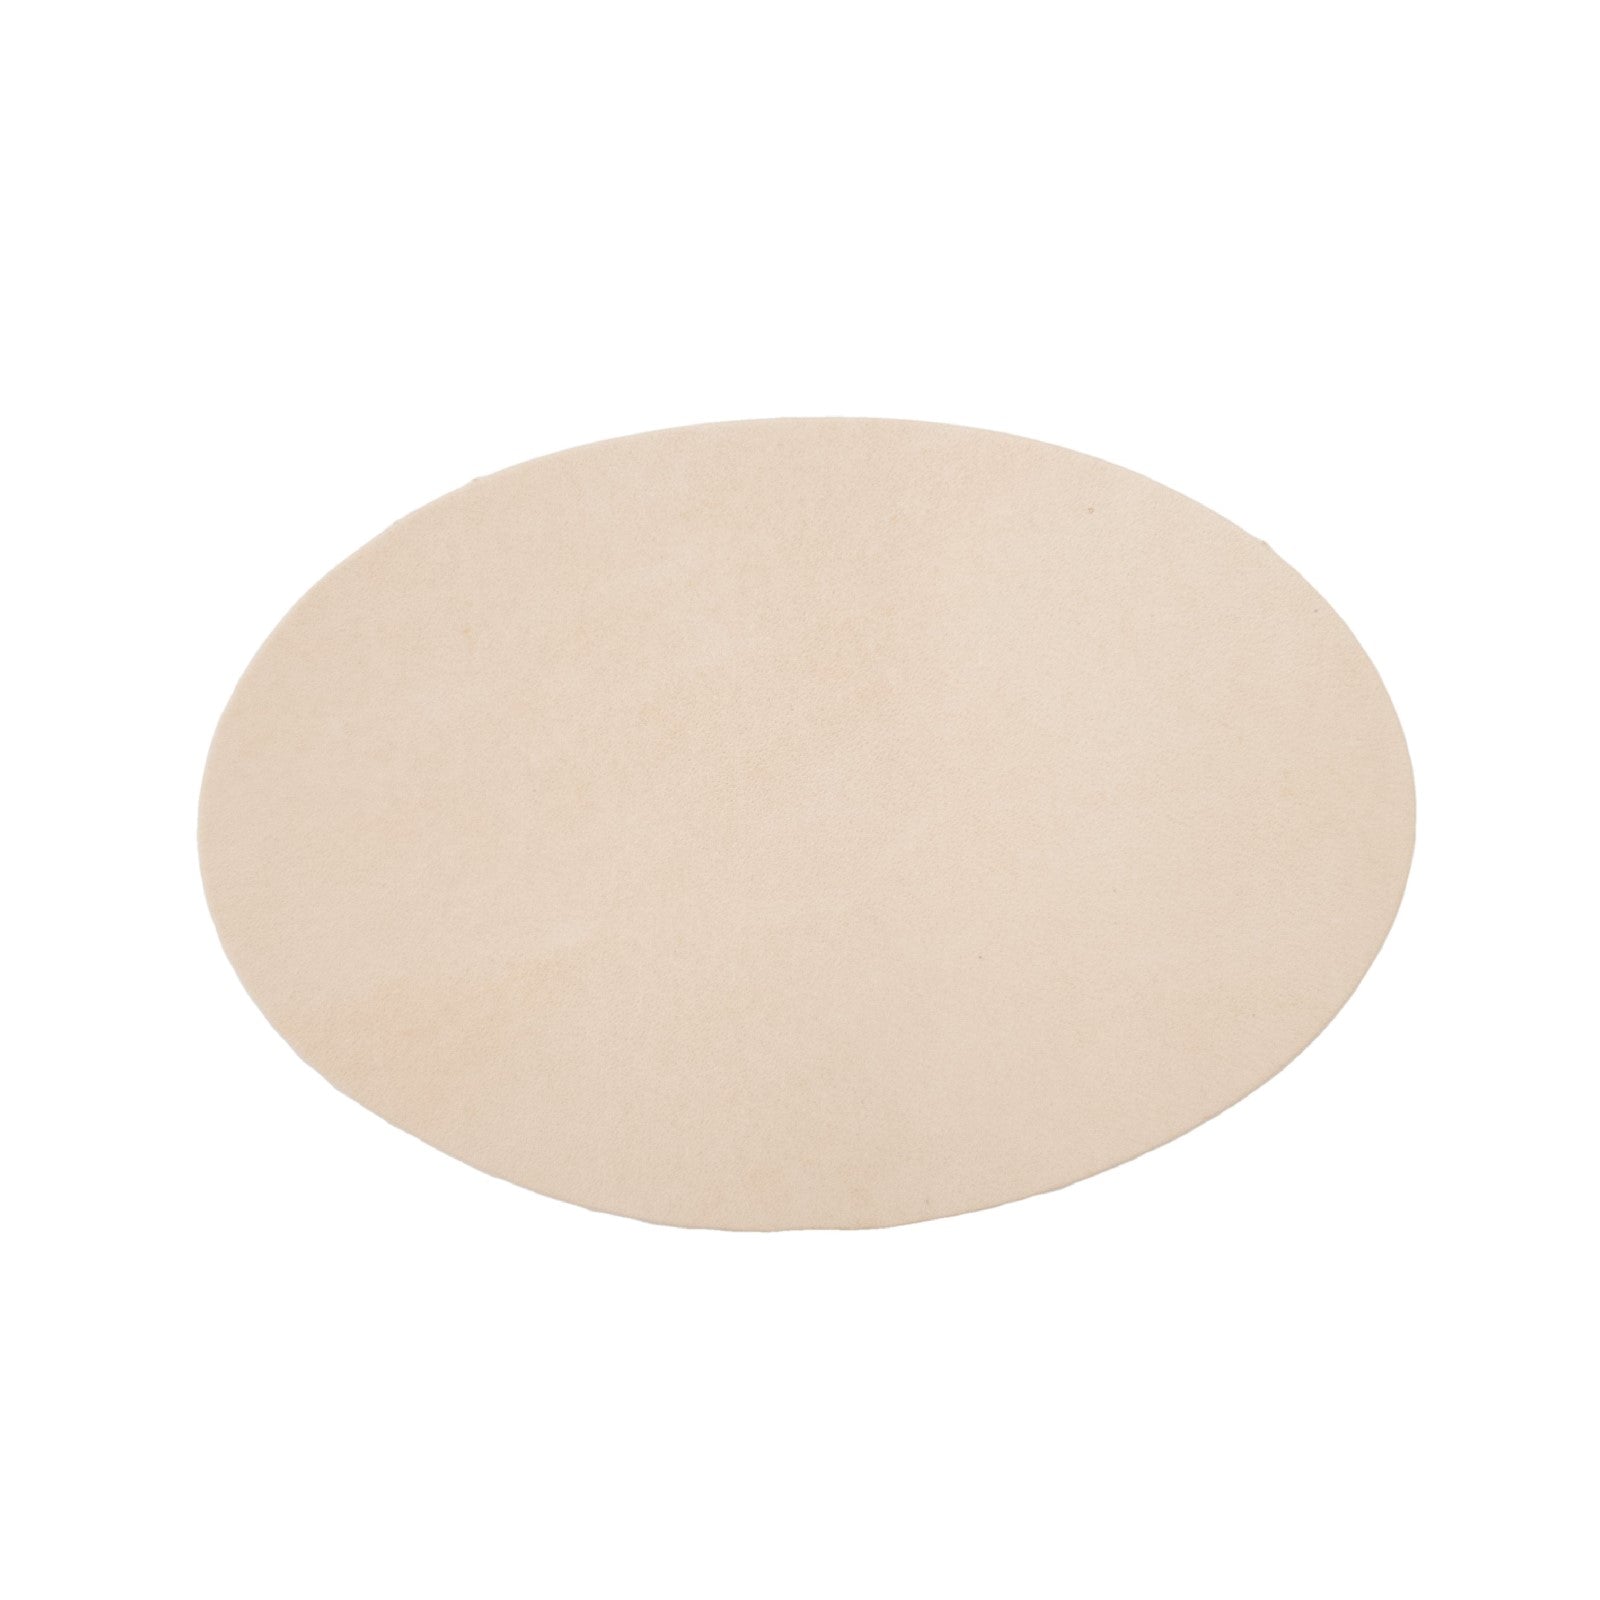 Artisan's Choice Veg Tan Leather Patches, Oval / 3-4 oz / Small Pack - 2 Pieces | The Leather Guy